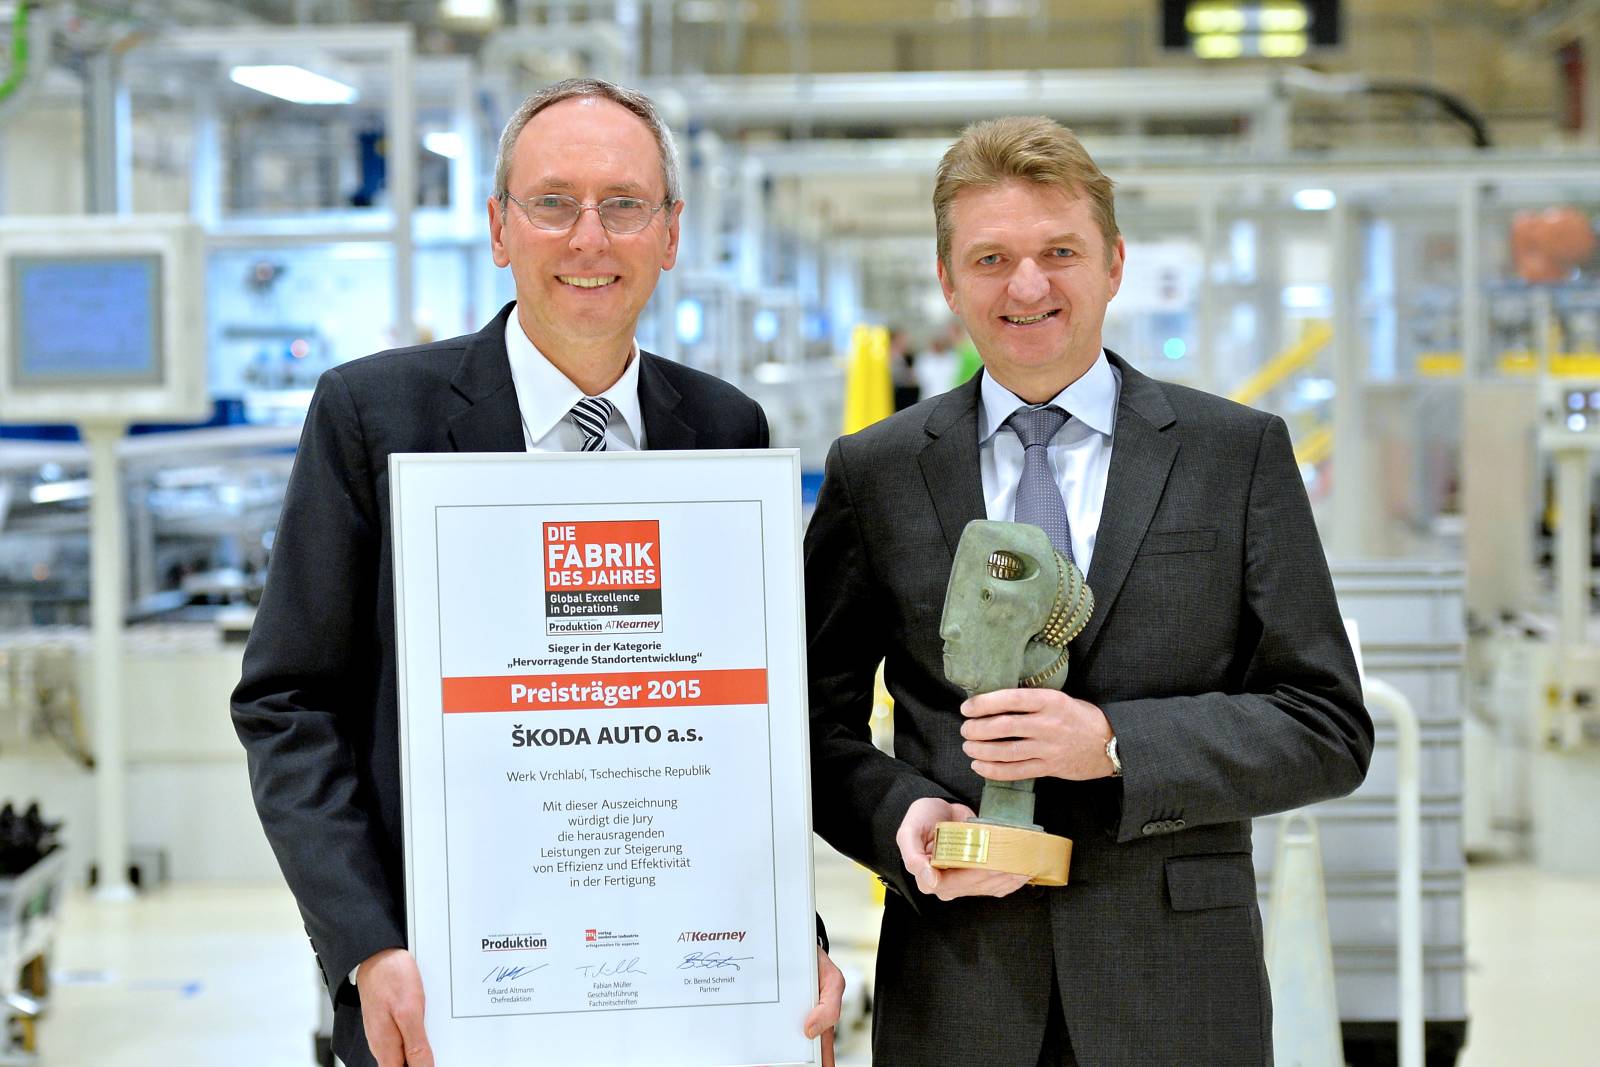 160309 ŠKODA Plant Receives ‘Factory of the Year’ Award’ Produced in Vrchlabí